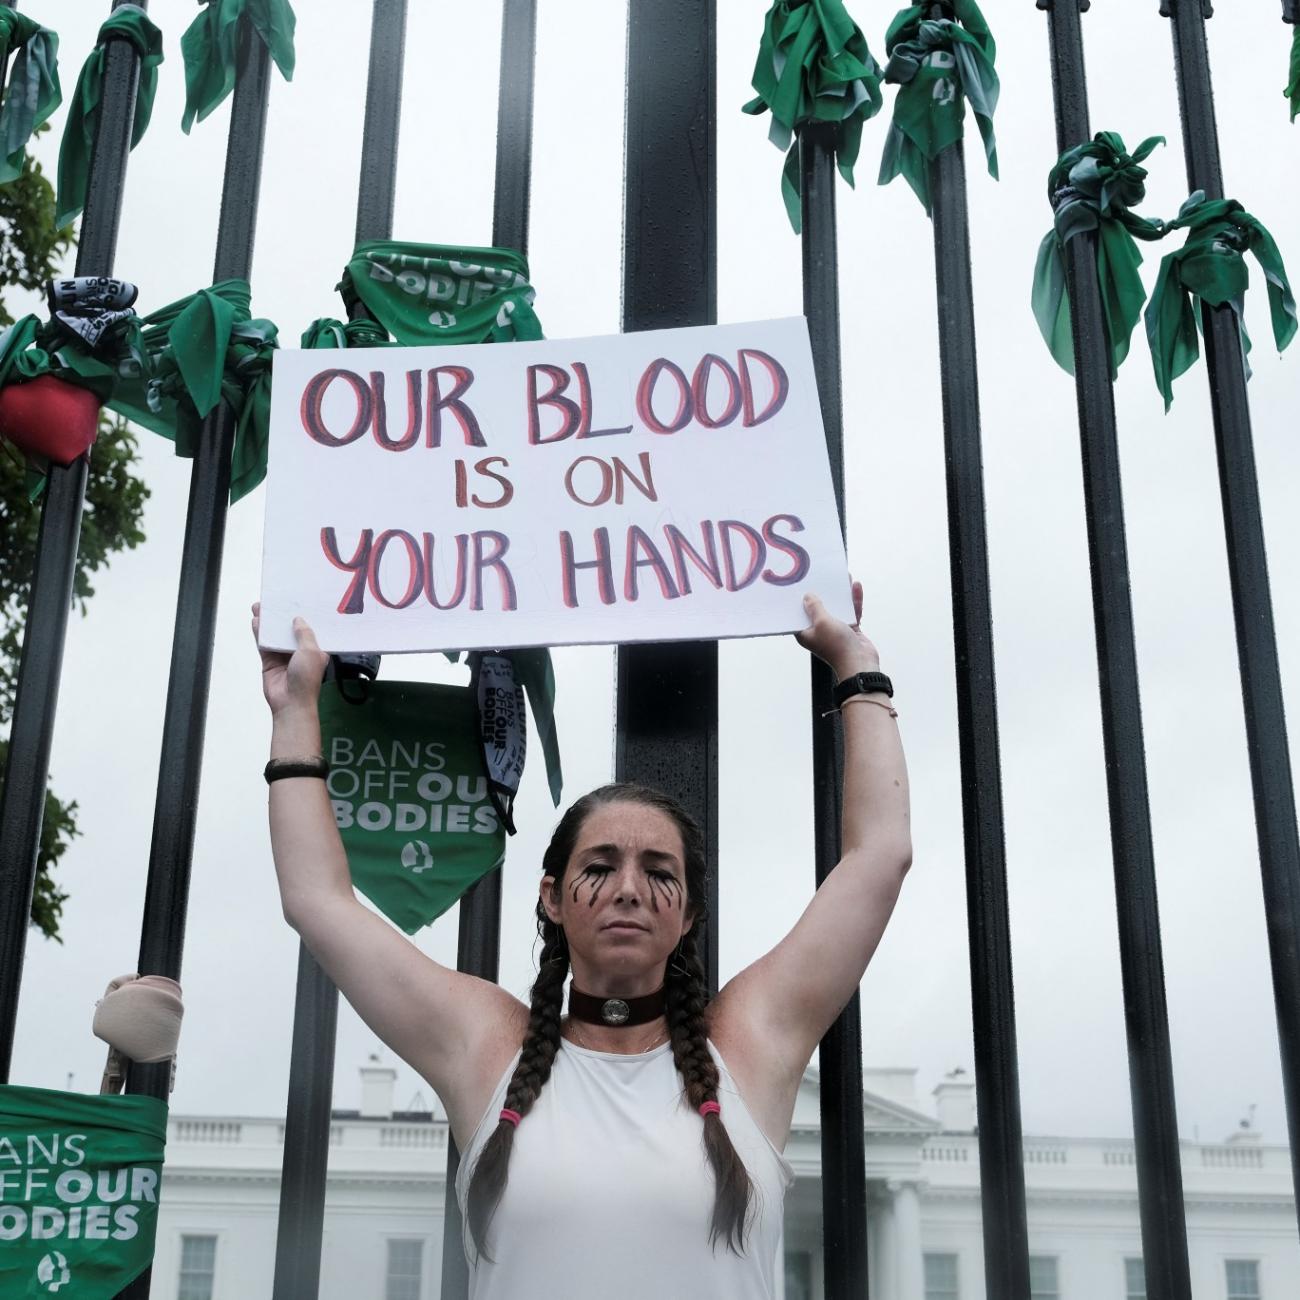 A woman with two braids wearing a white tank top holds up a sign that reads "our blood is on your hands" in front of the white house